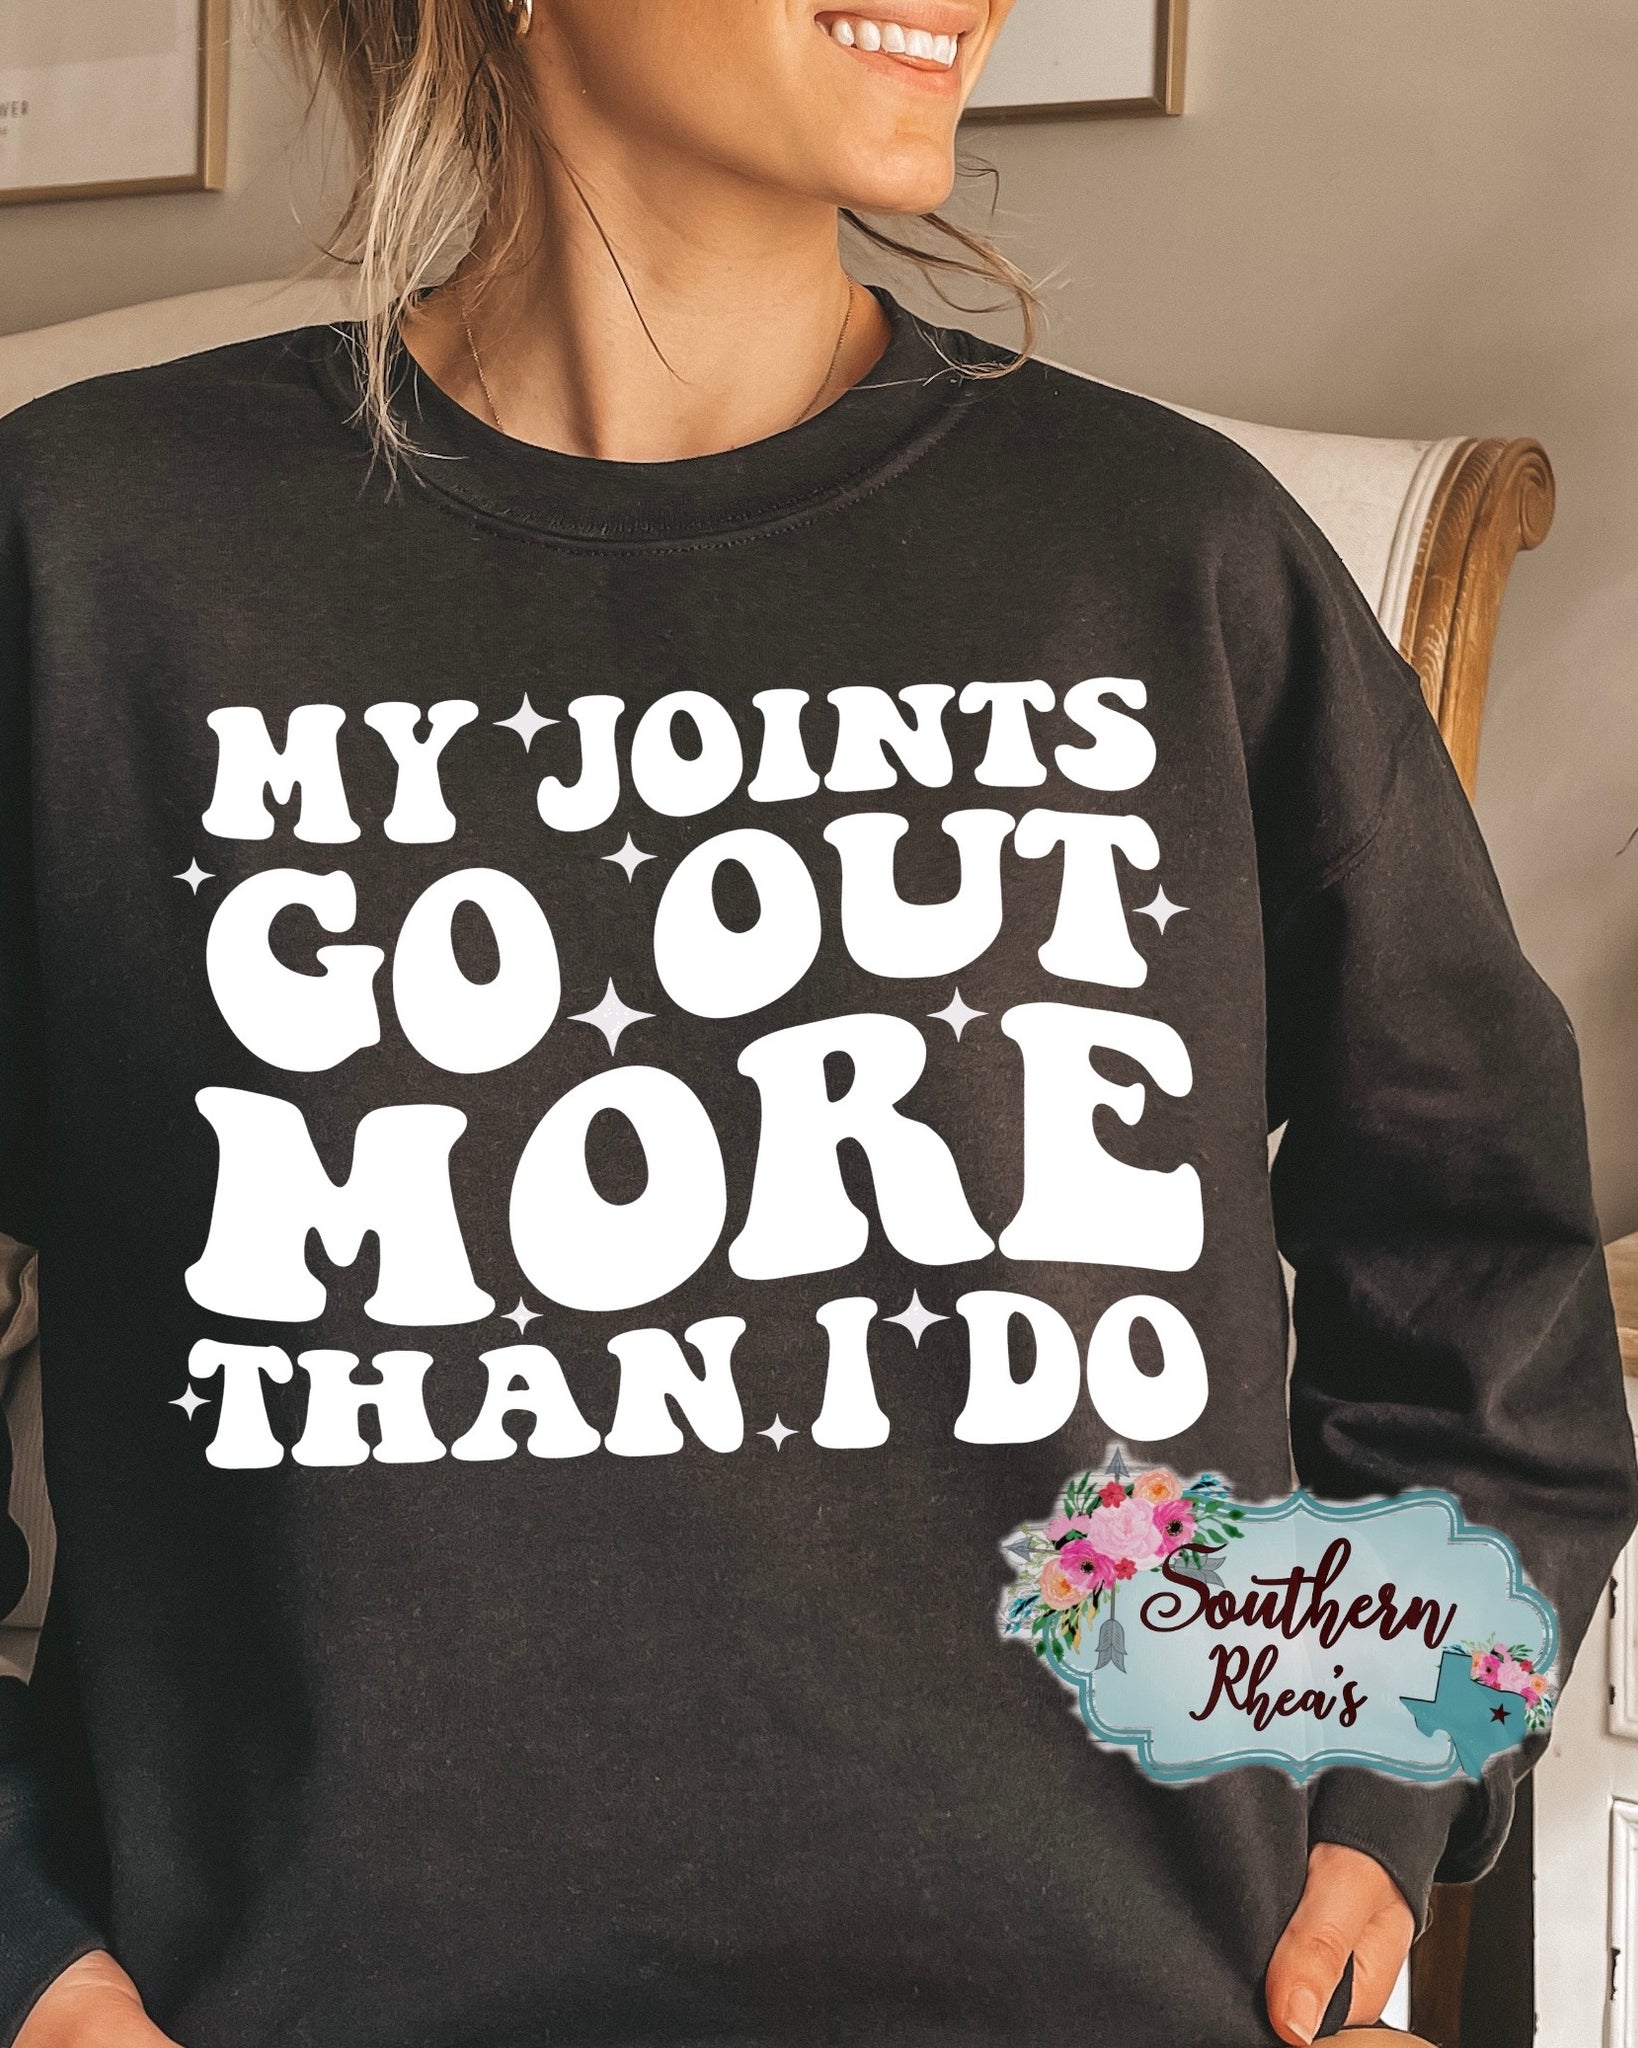 Joints Go Out More Than I Do - White Transfer